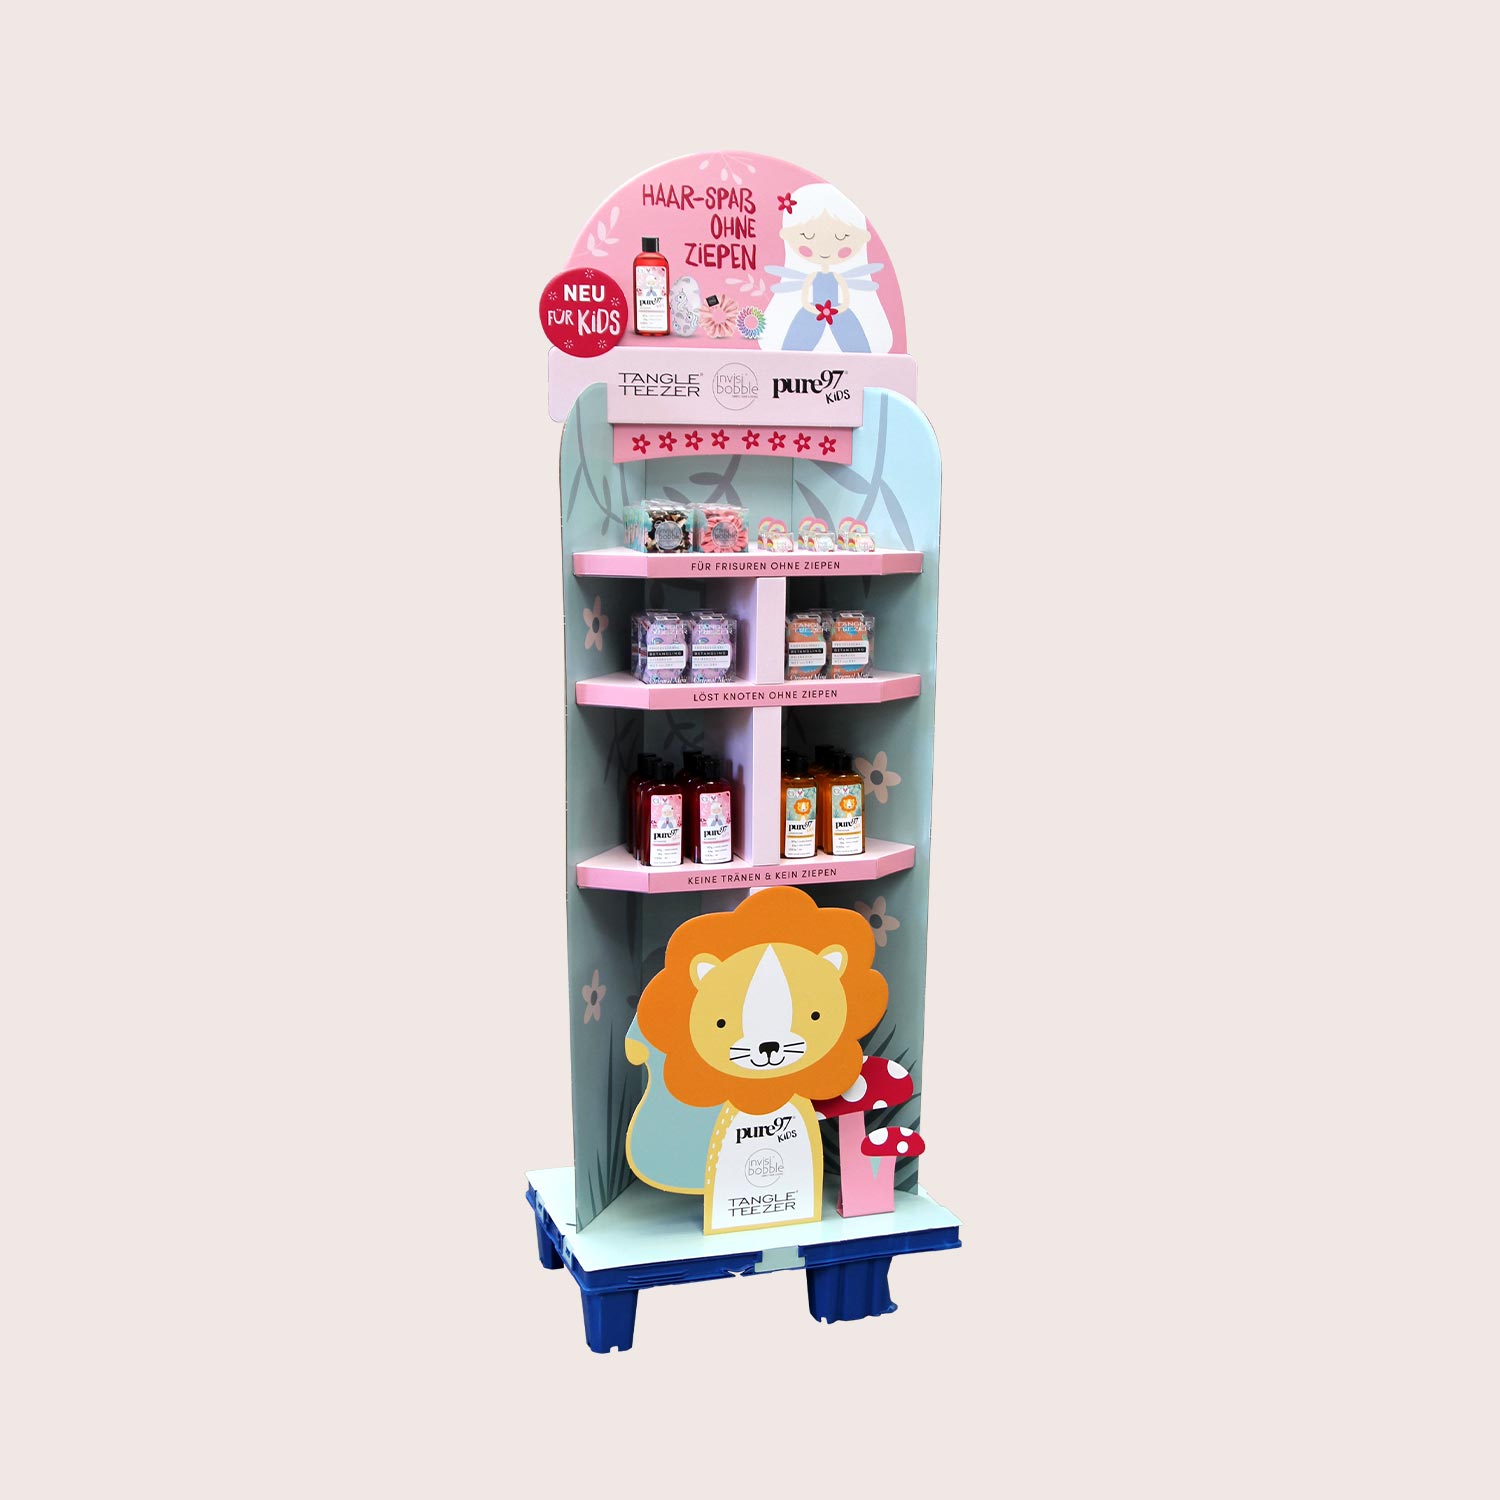 Pallet display for hair care products